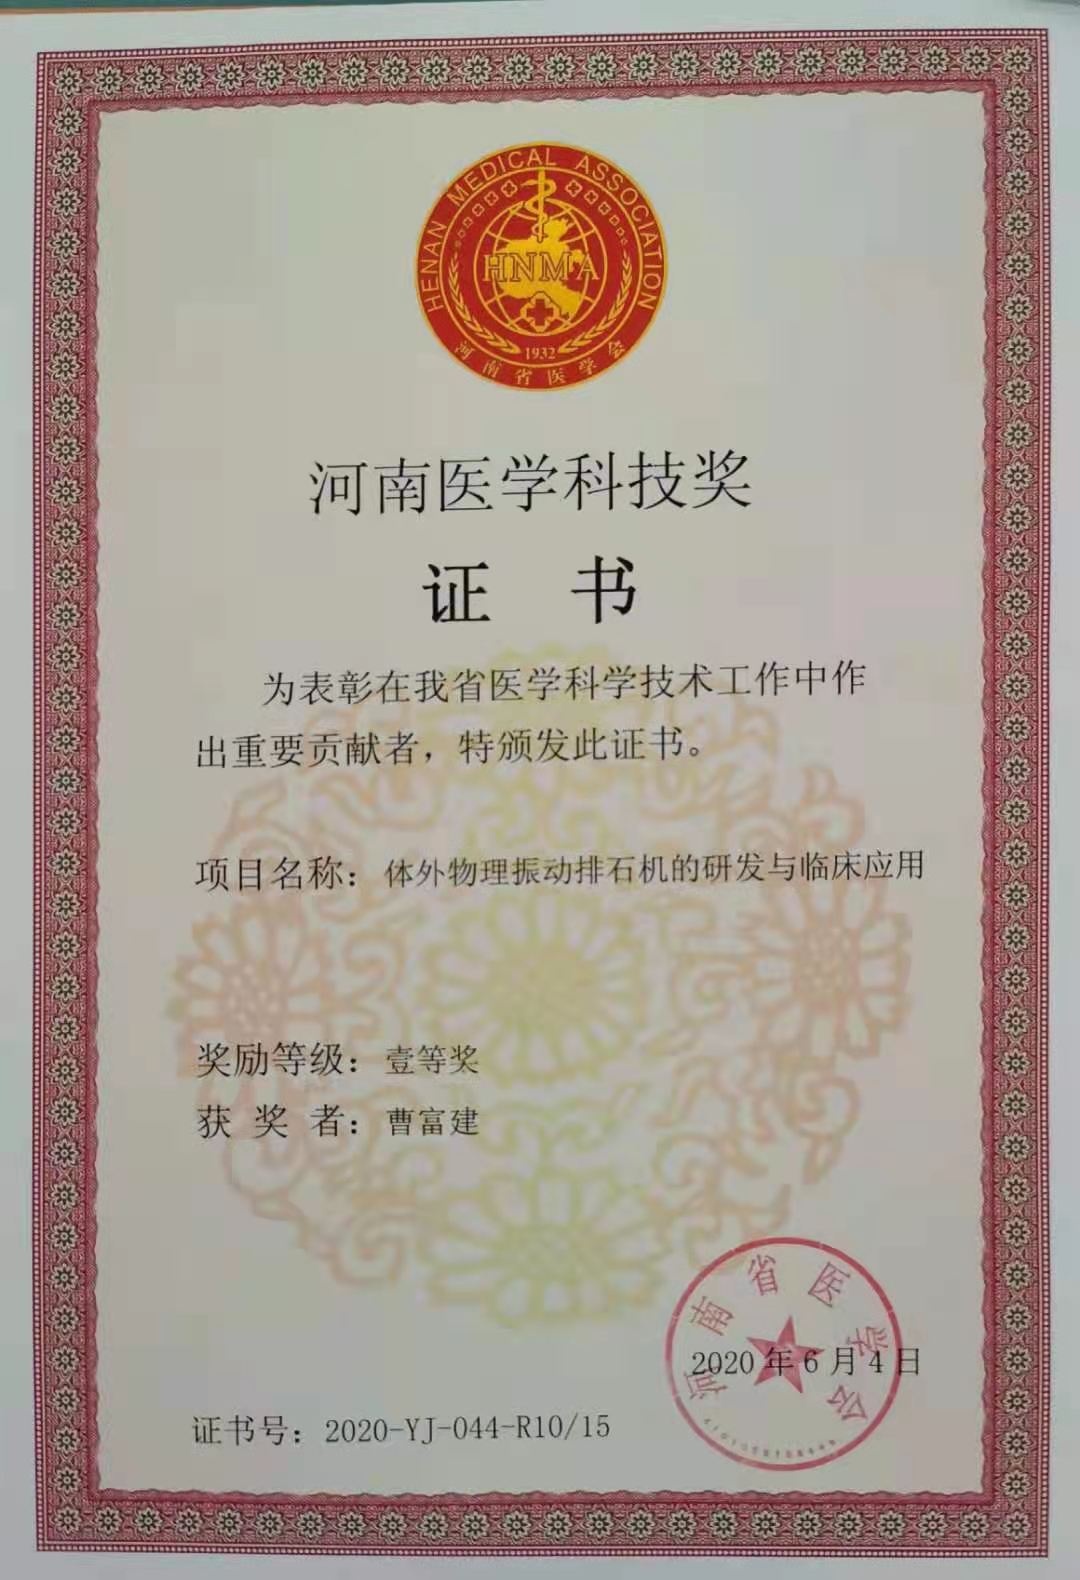 Kangbaijia external physical vibration lithecbole (EPVL) won the first prize of Henan Medical Science and Technology